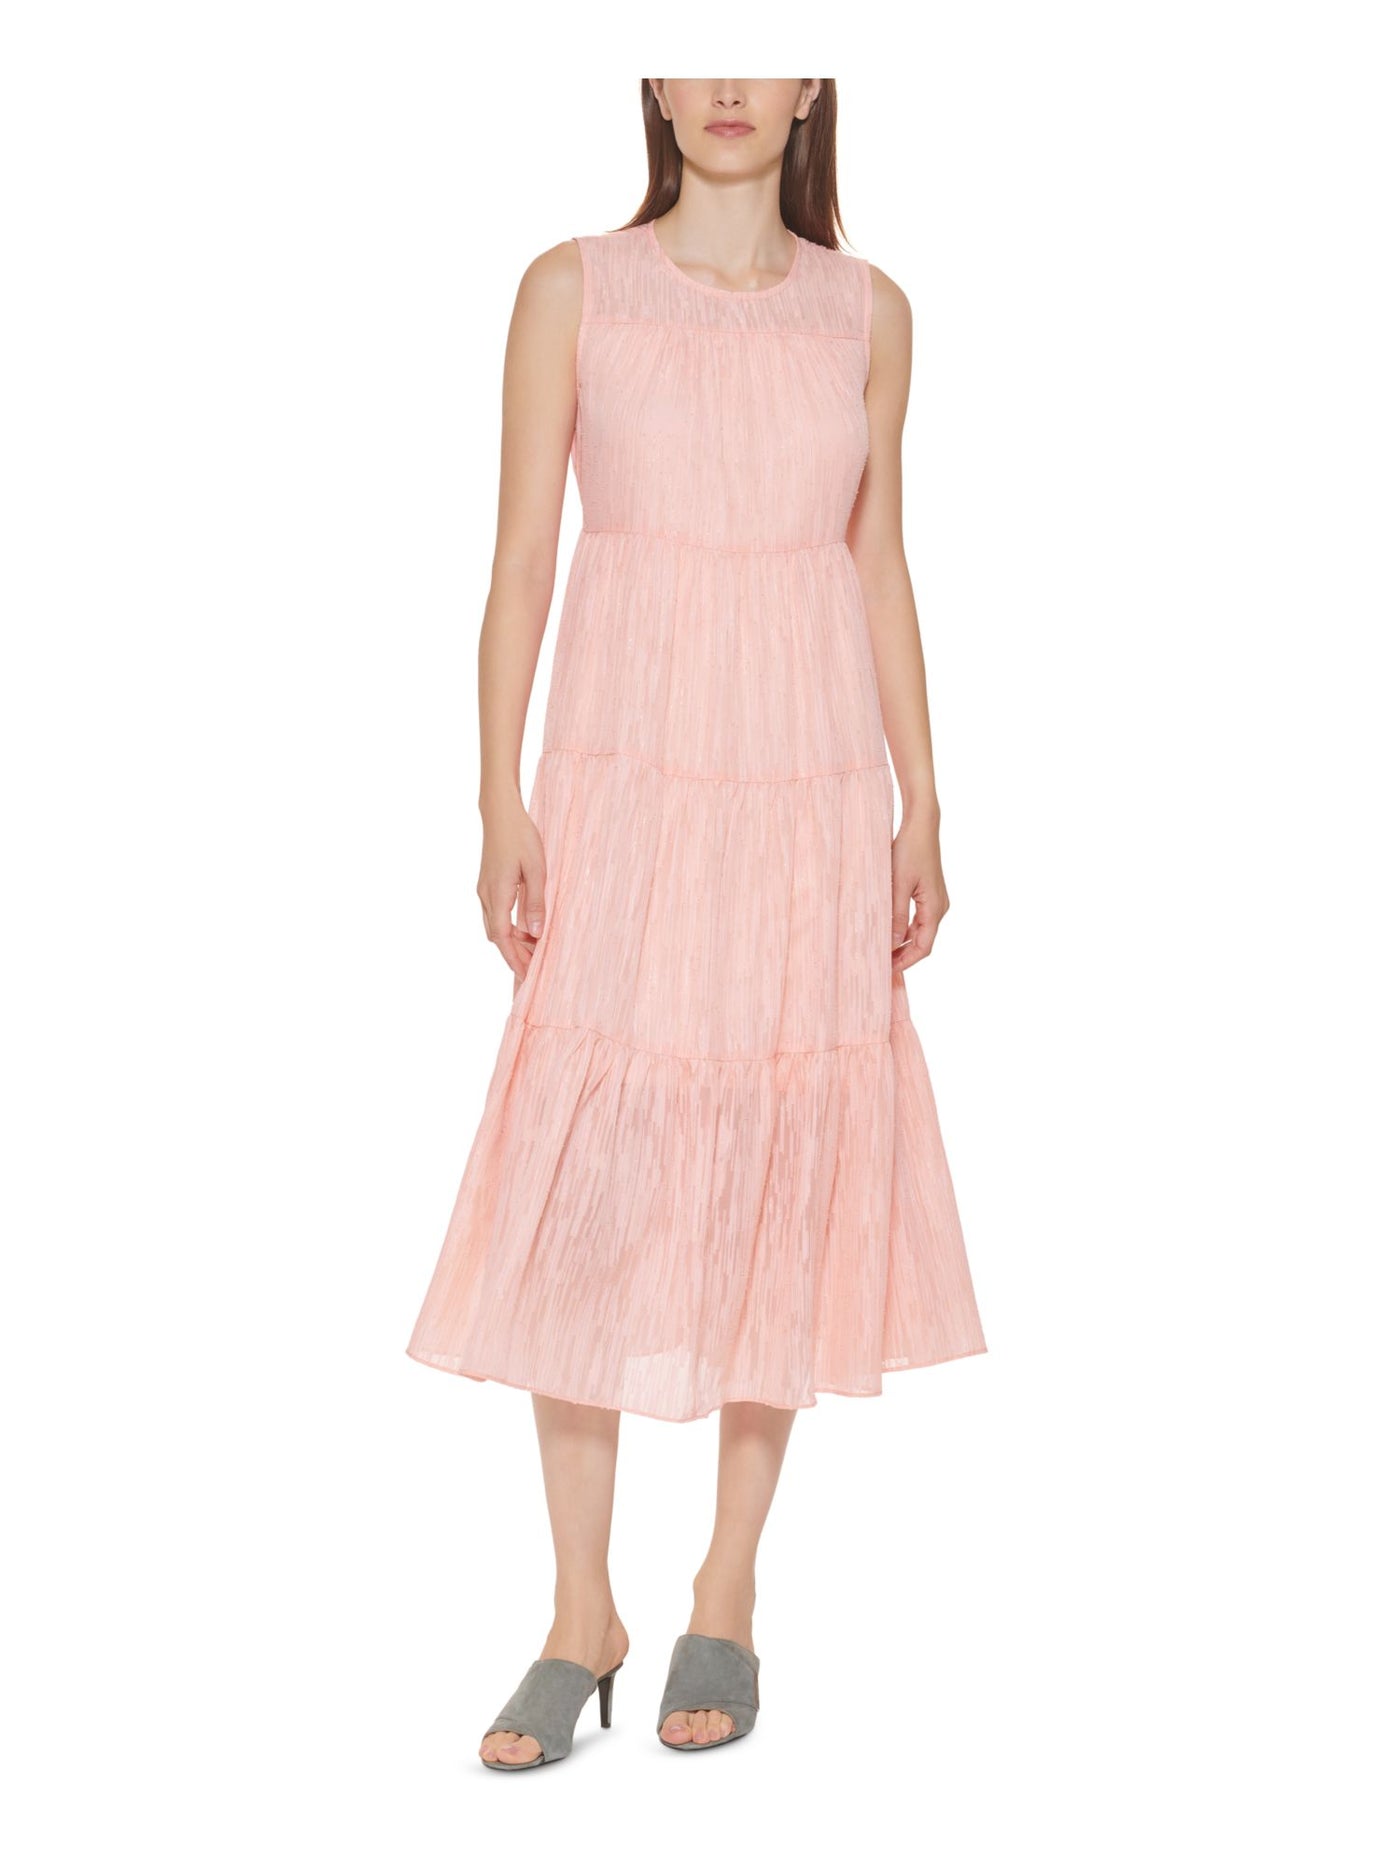 CALVIN KLEIN Womens Pink Sheer Tie Tiered Keyhole Closure Lined Pul Sleeveless Round Neck Tea-Length Shift Dress 14